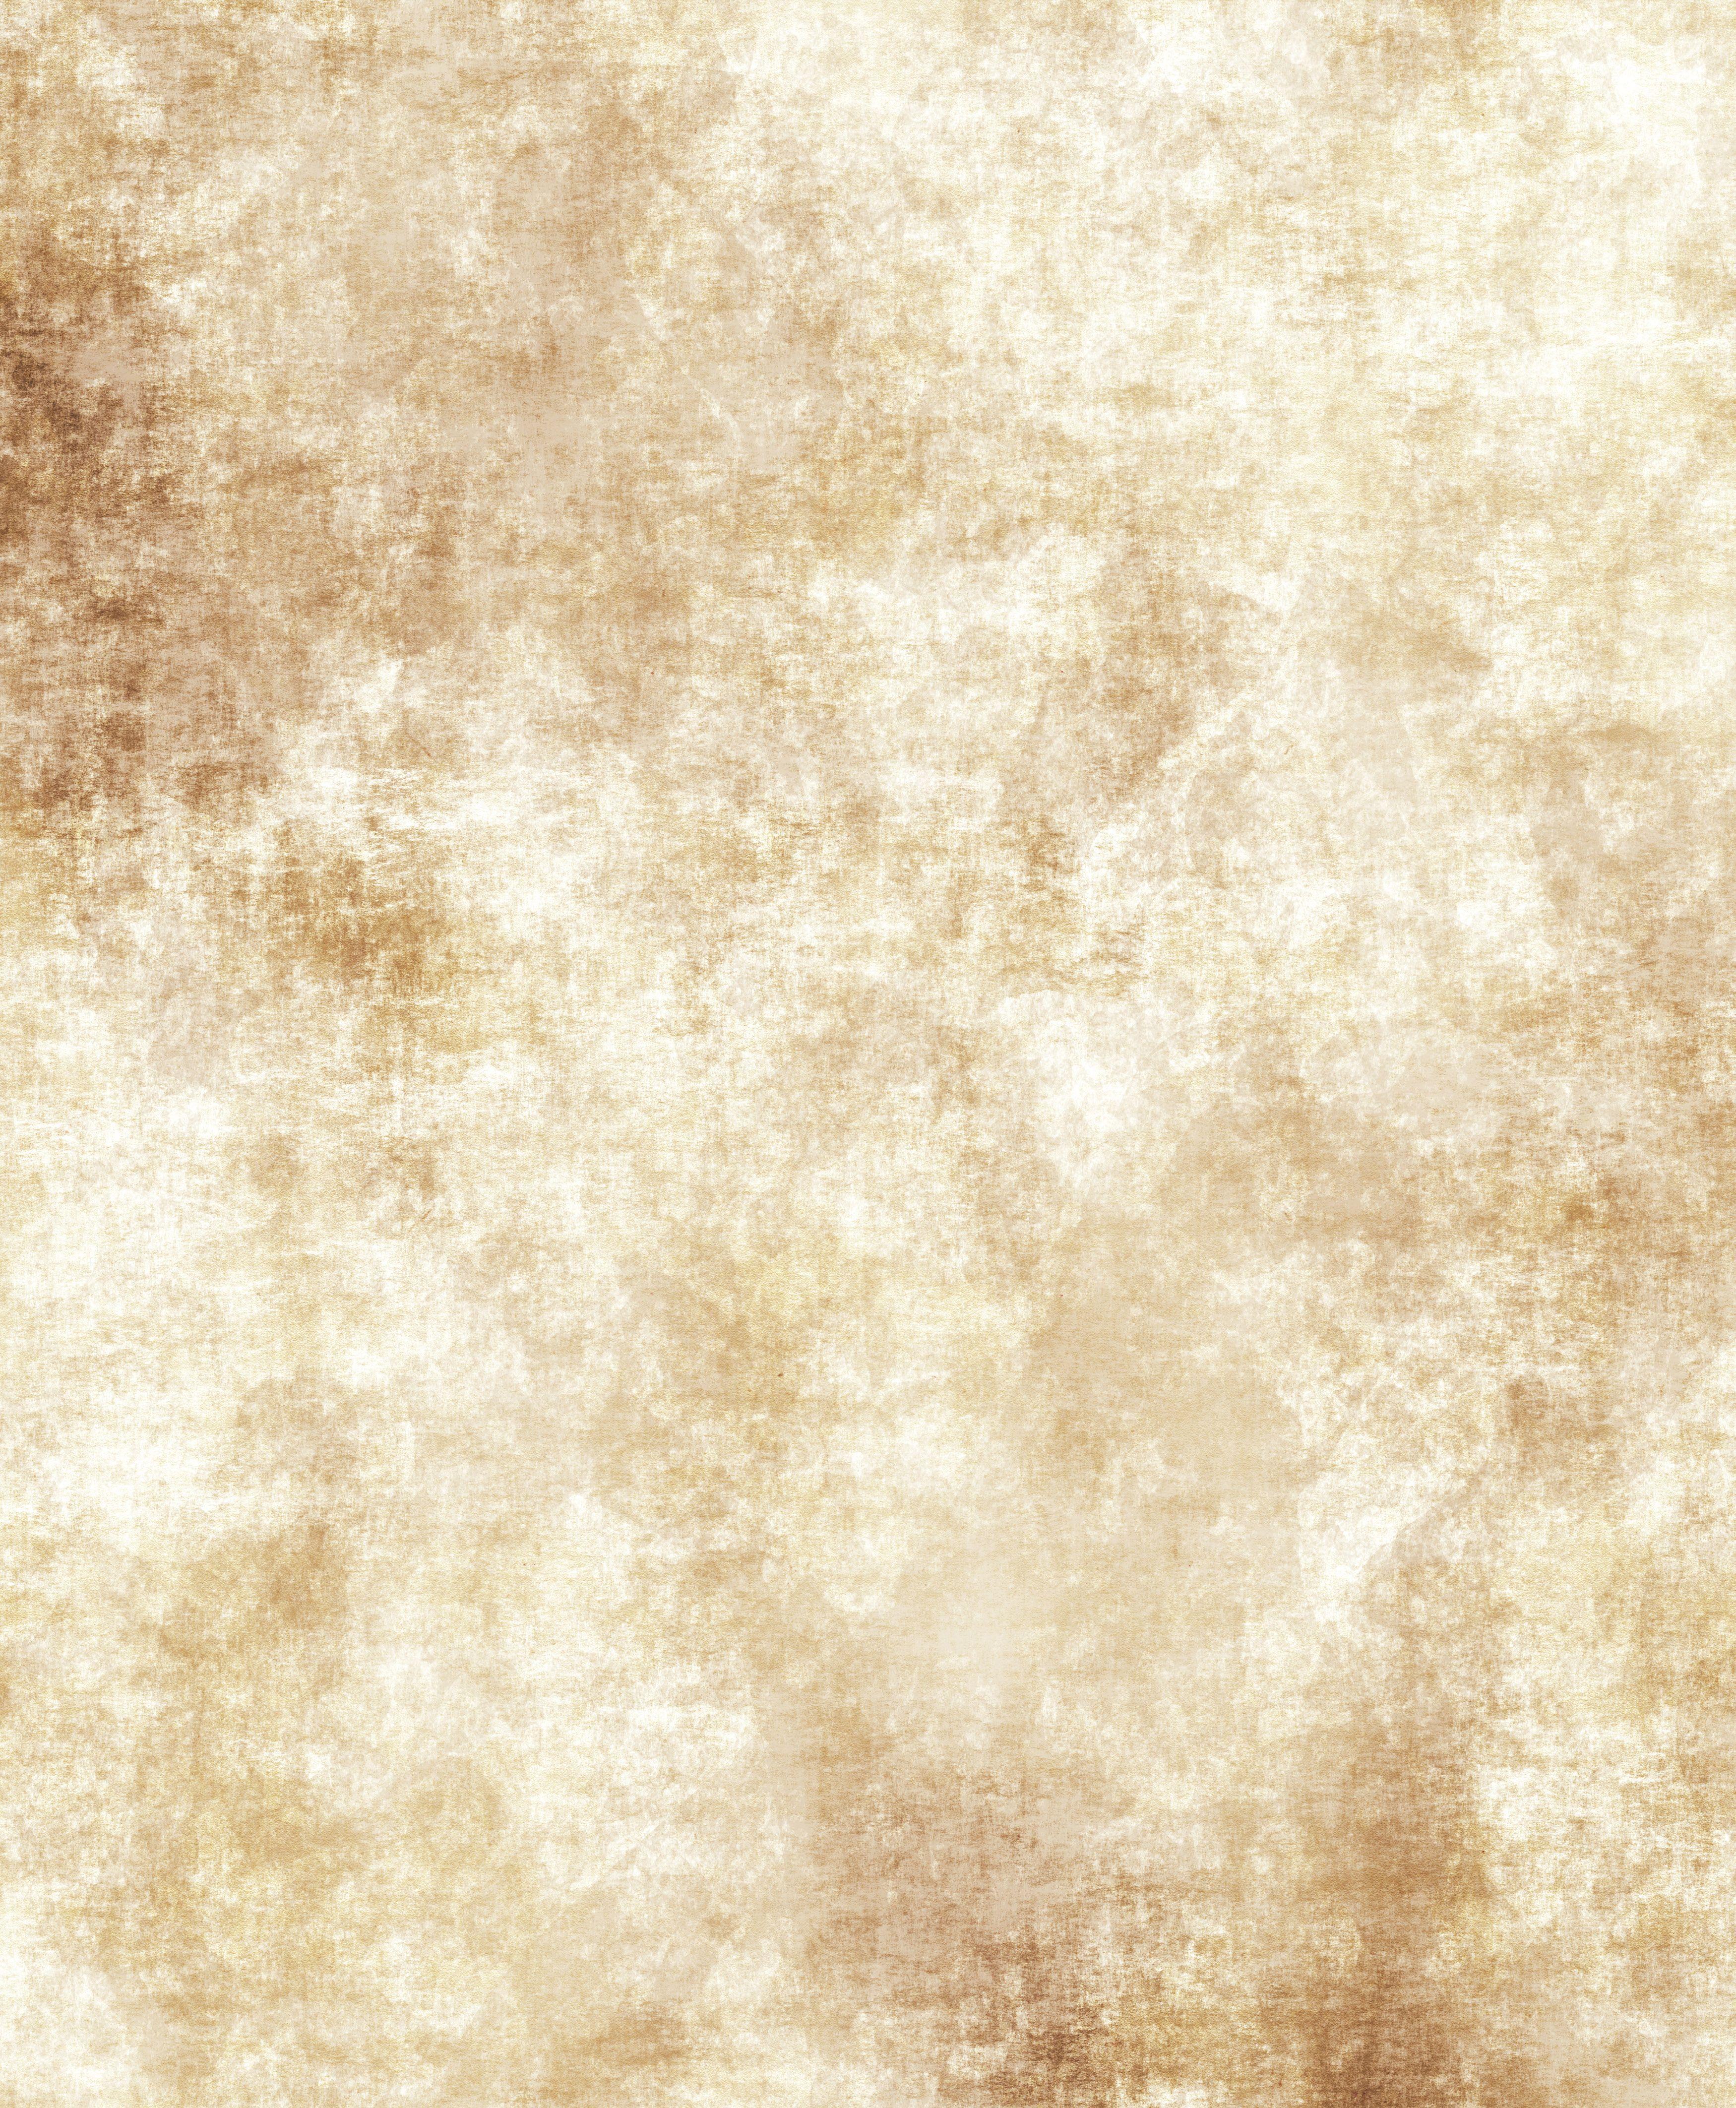 Free Old Paper Textures and Parchment Paper Background